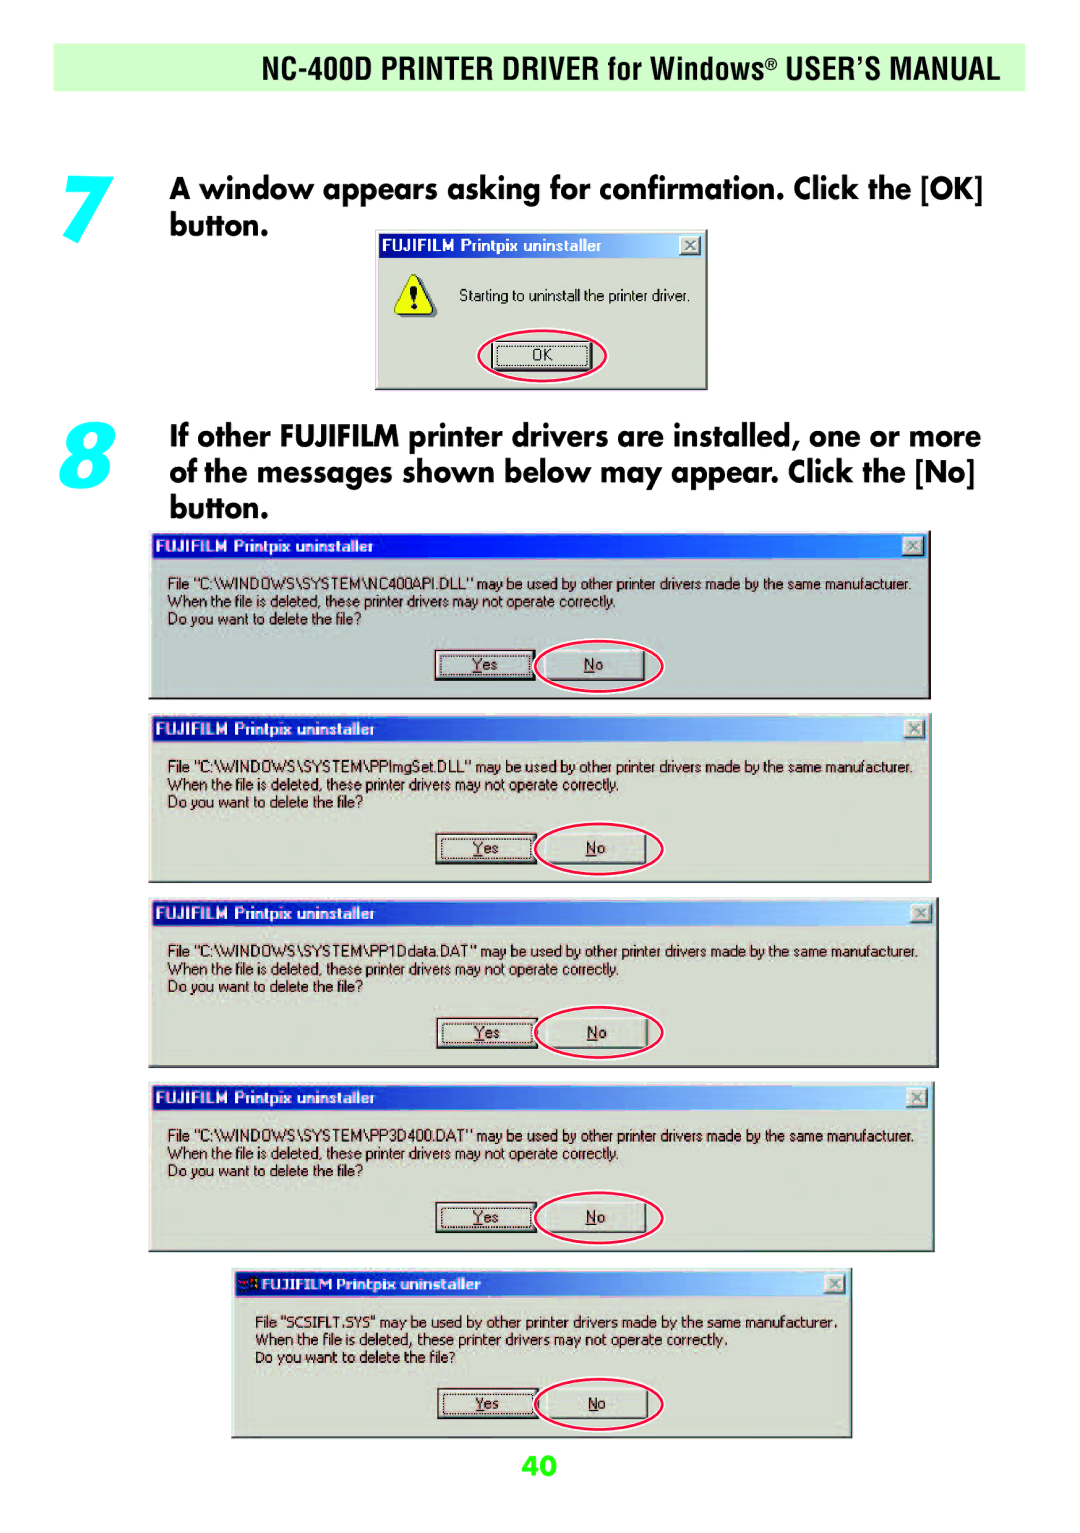 FujiFilm NC-400D user manual Window appears asking for confirmation. Click the OK, Button 